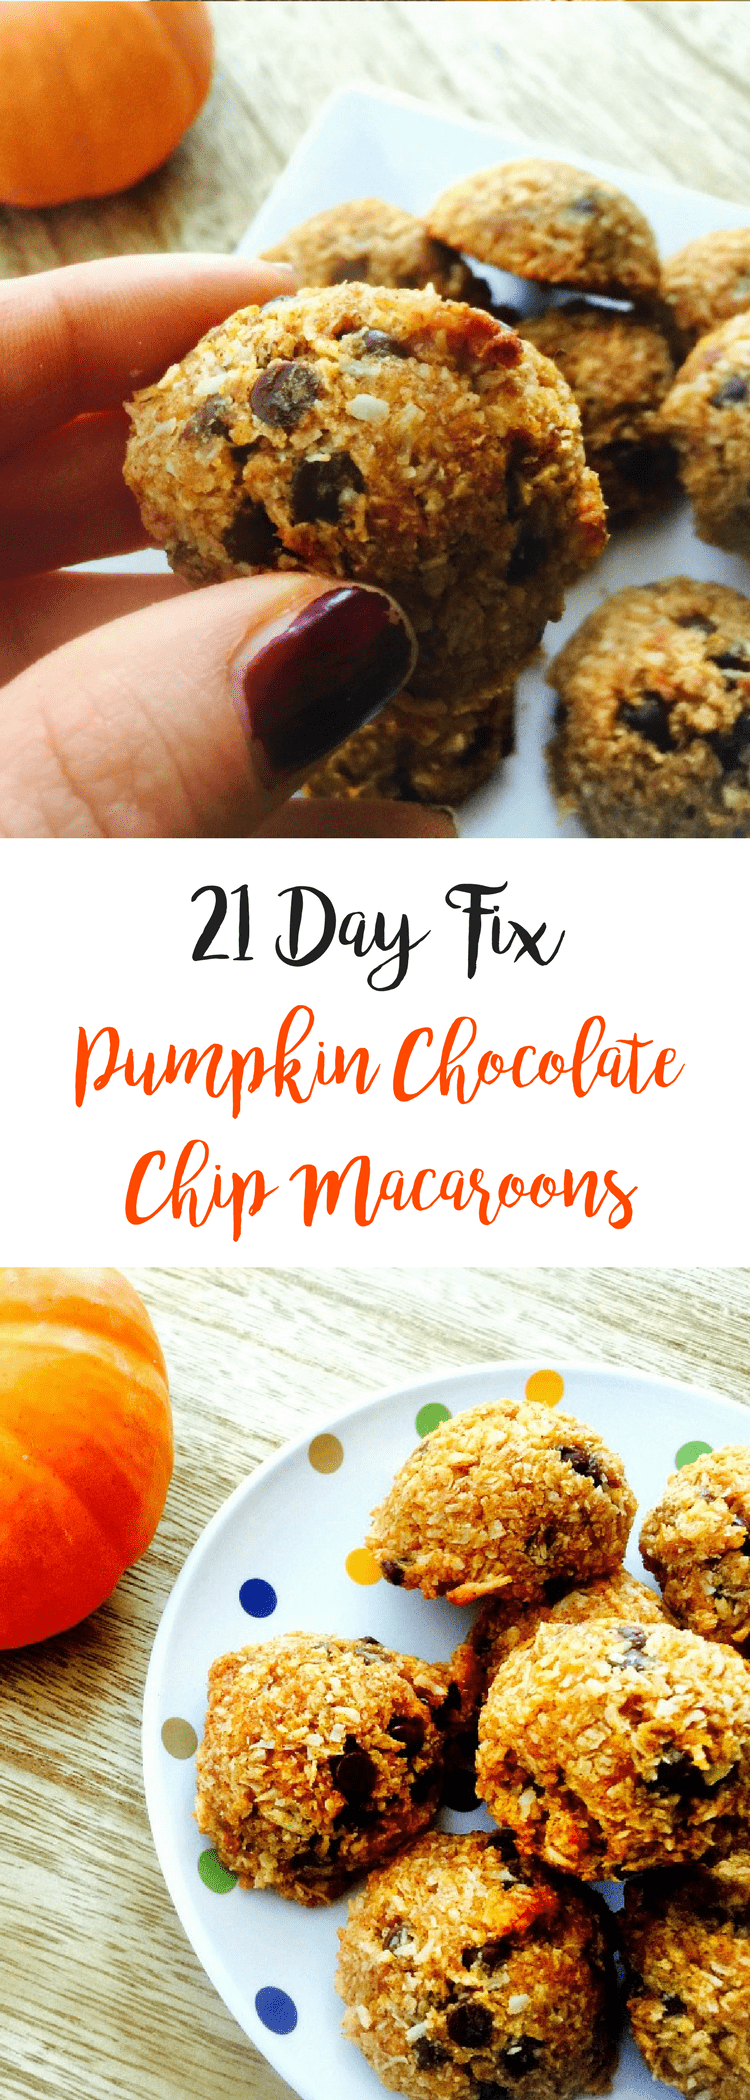 21 Day Fix Pumpkin Chocolate Chip Macaroons {Gluten-free:Dairy-free} | Confessions of a Fit Foodie